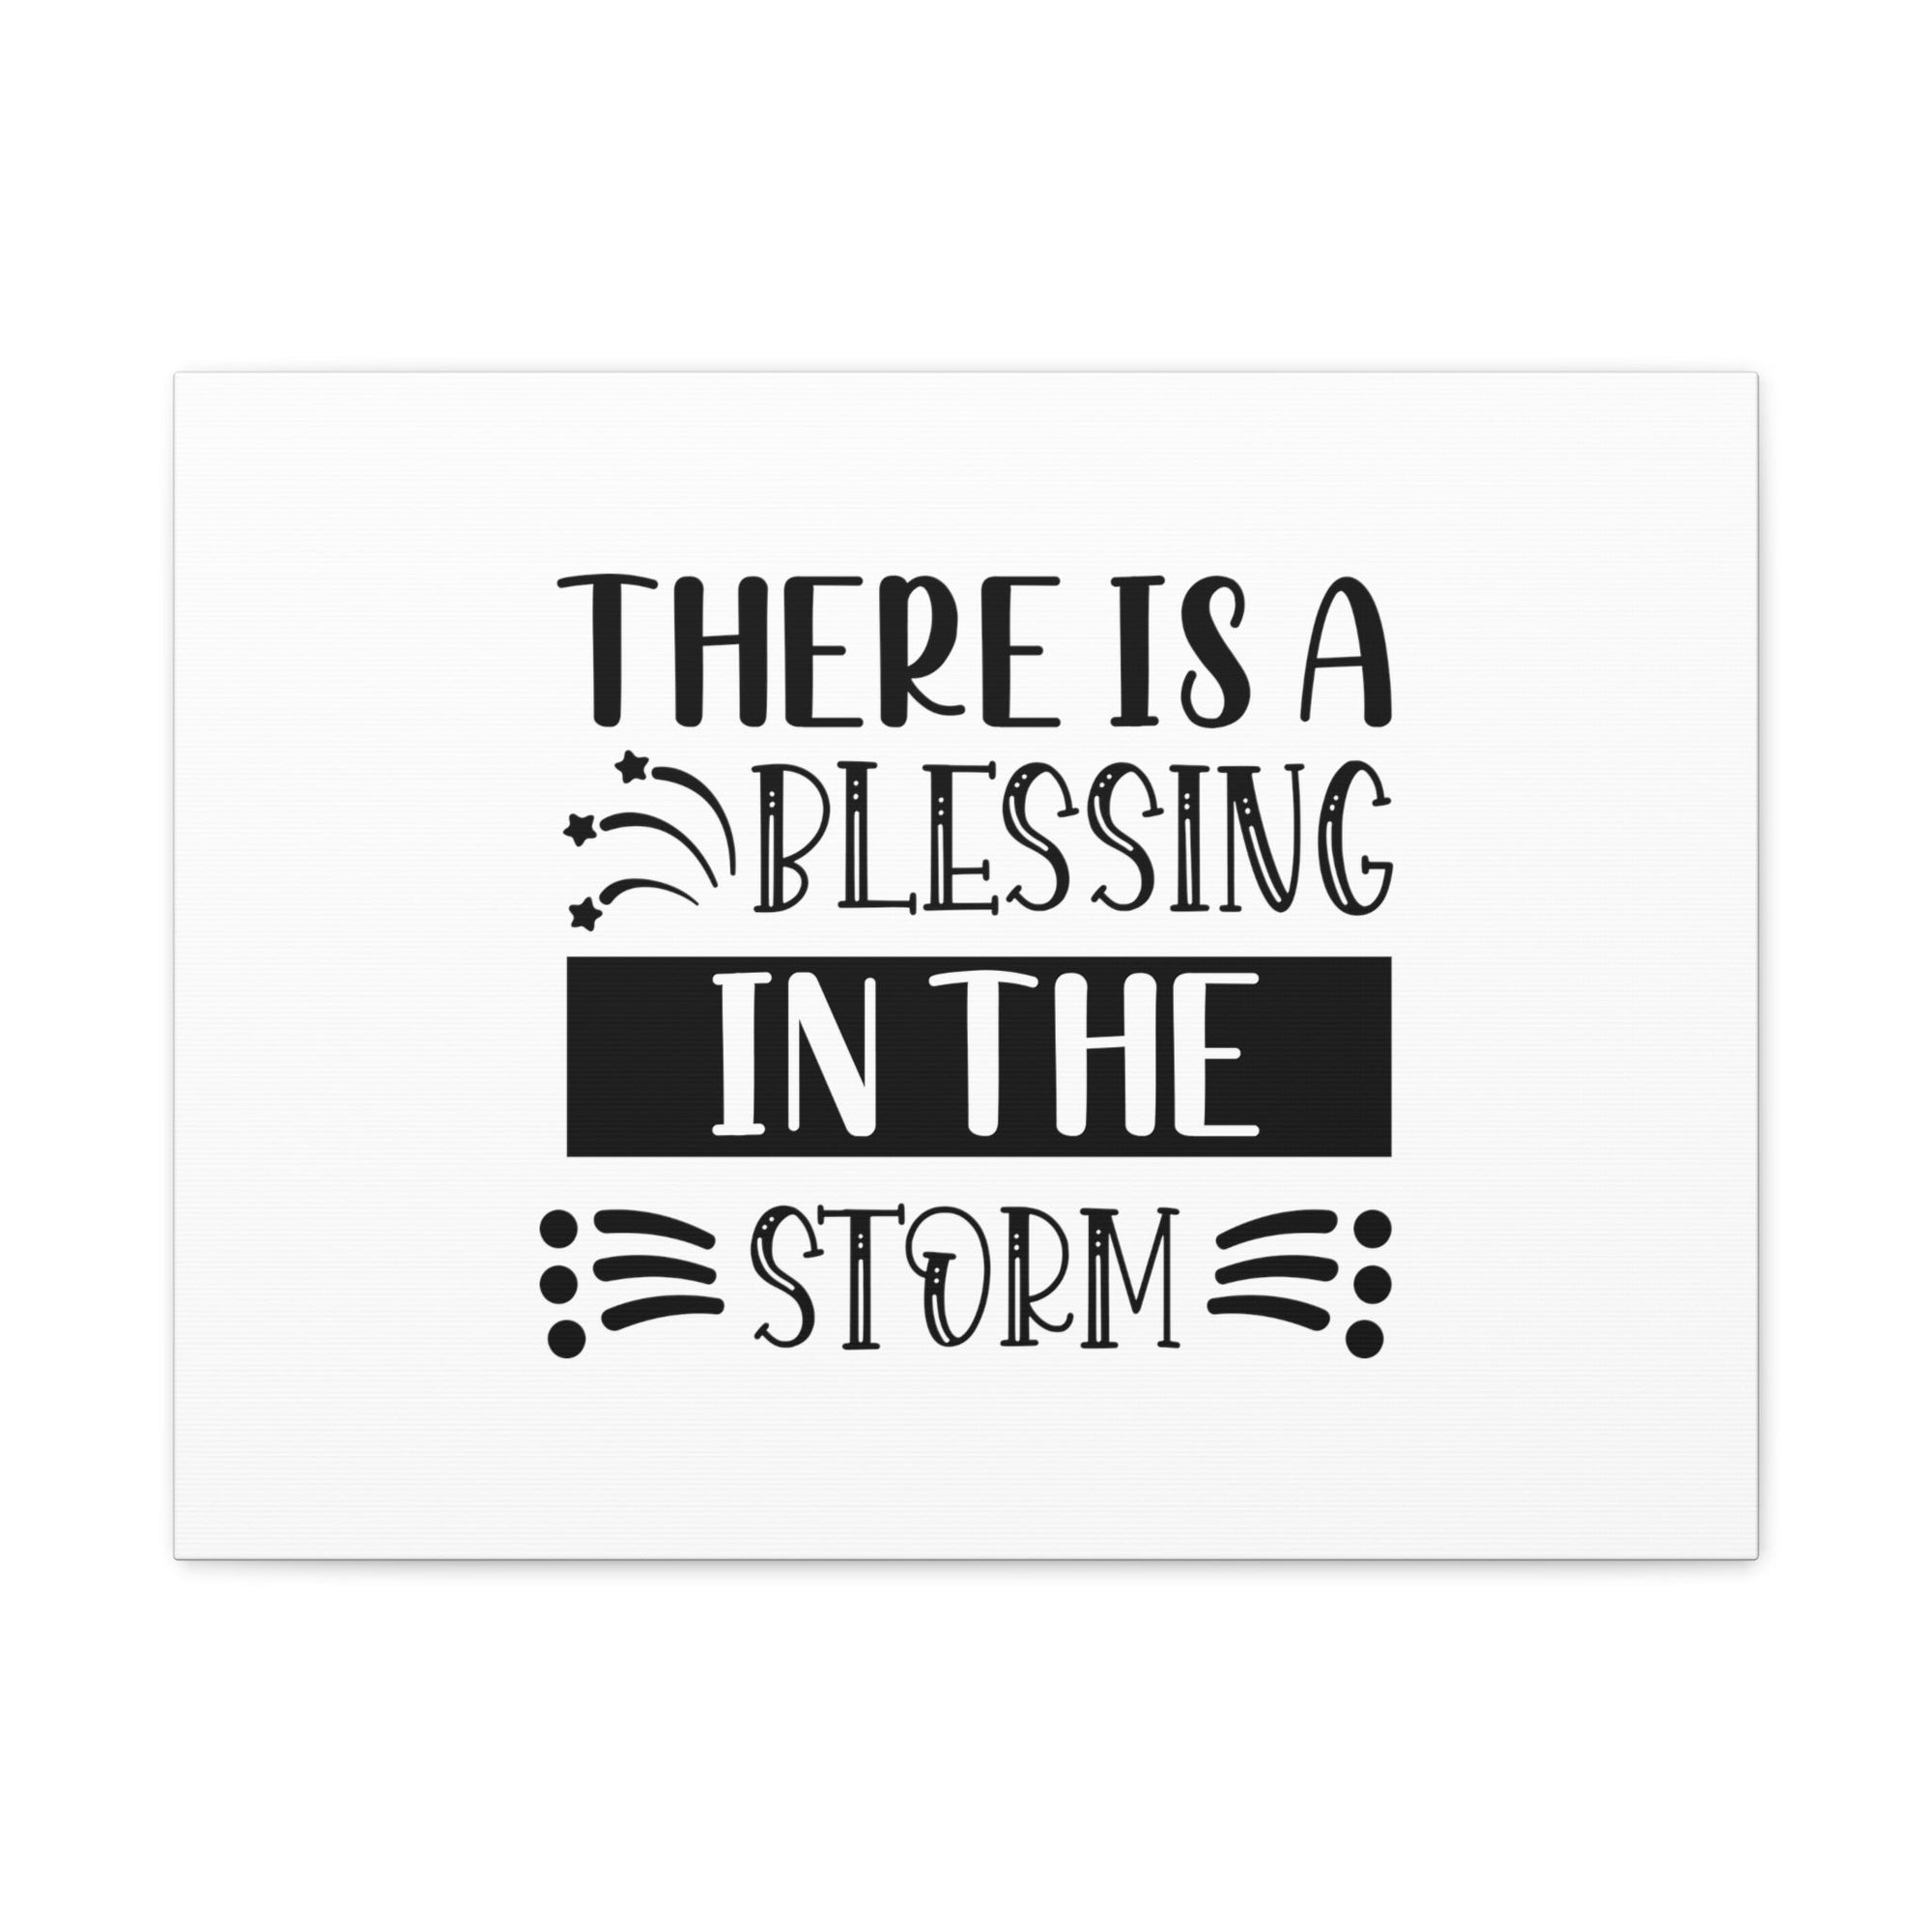 Scripture Walls There Is A Blessing In The Storm Isaiah 4:6 Christian Wall Art Bible Verse Print Ready to Hang Unframed-Express Your Love Gifts